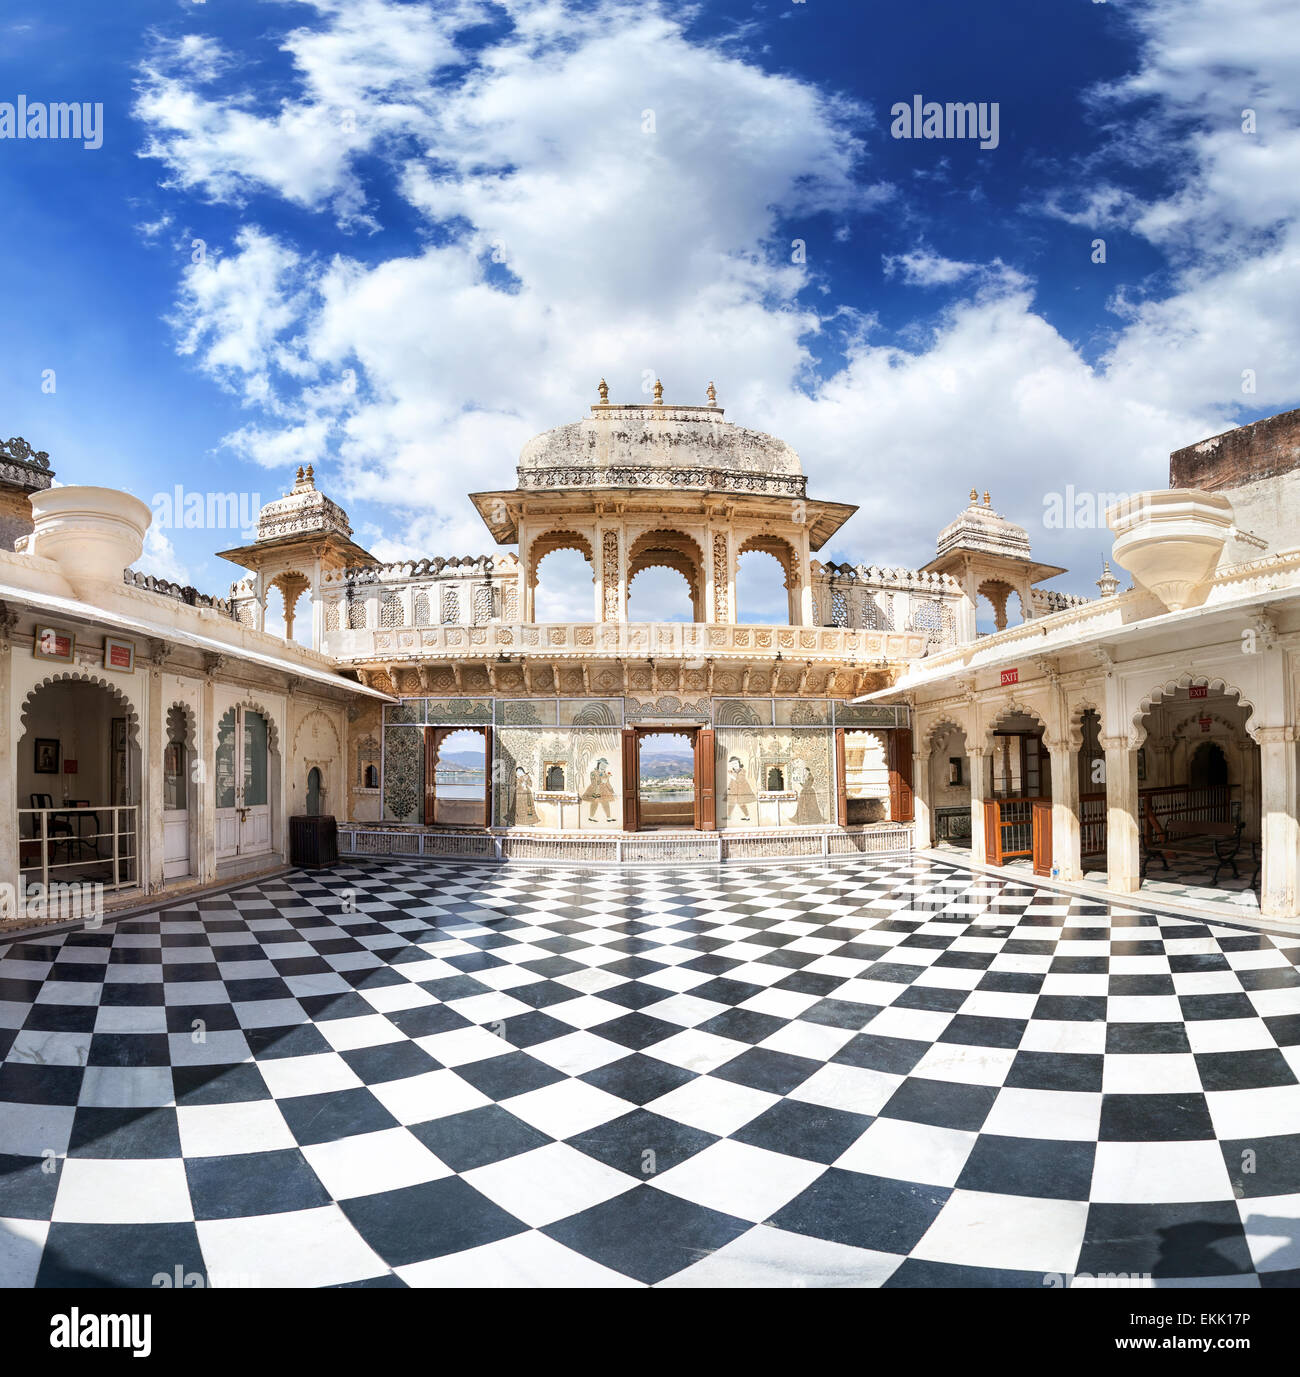 City Palace museum with surreal chess floor in Udaipur, Rajasthan, India Stock Photo